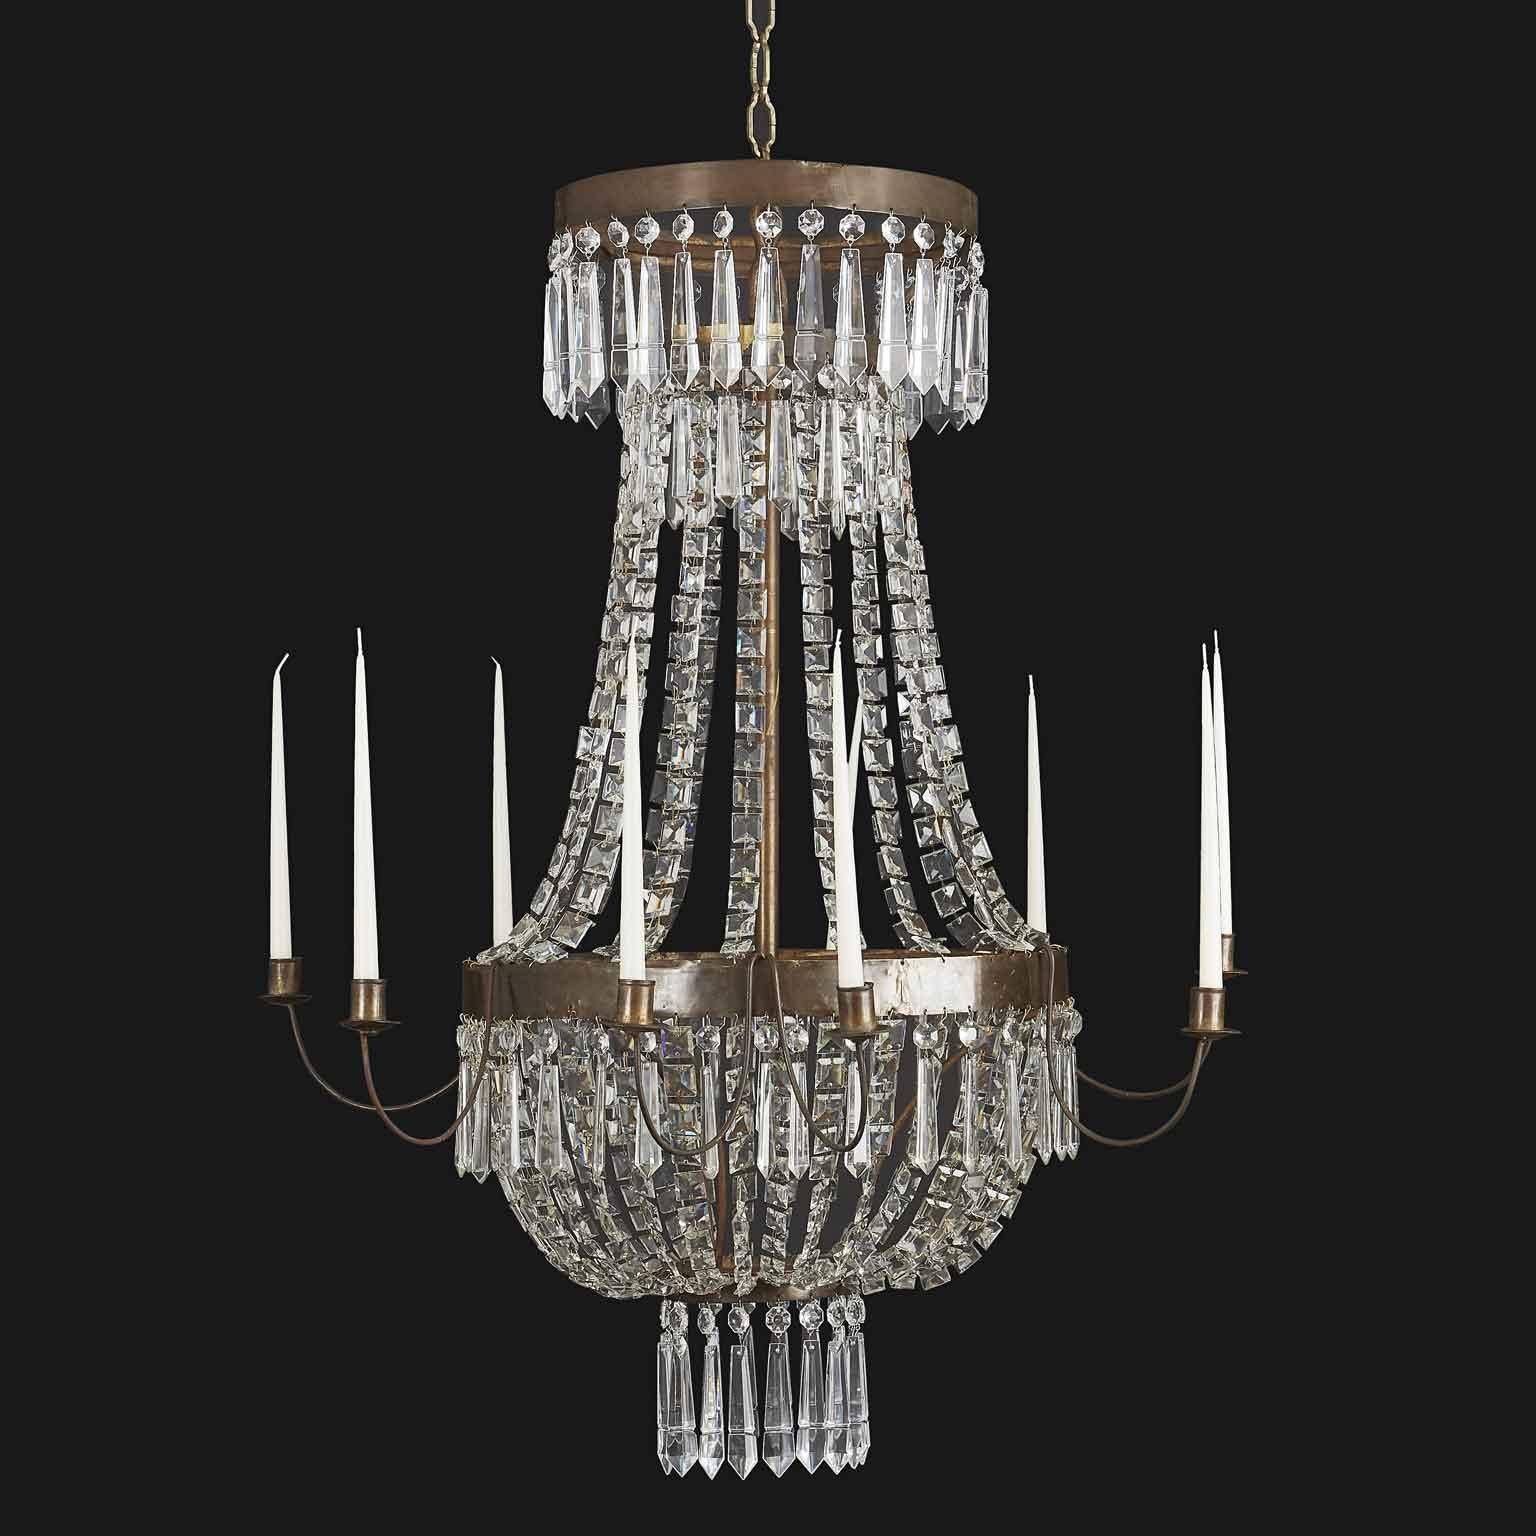 19th Century Italian Empire Crystal Candle Chandelier For Sale 1